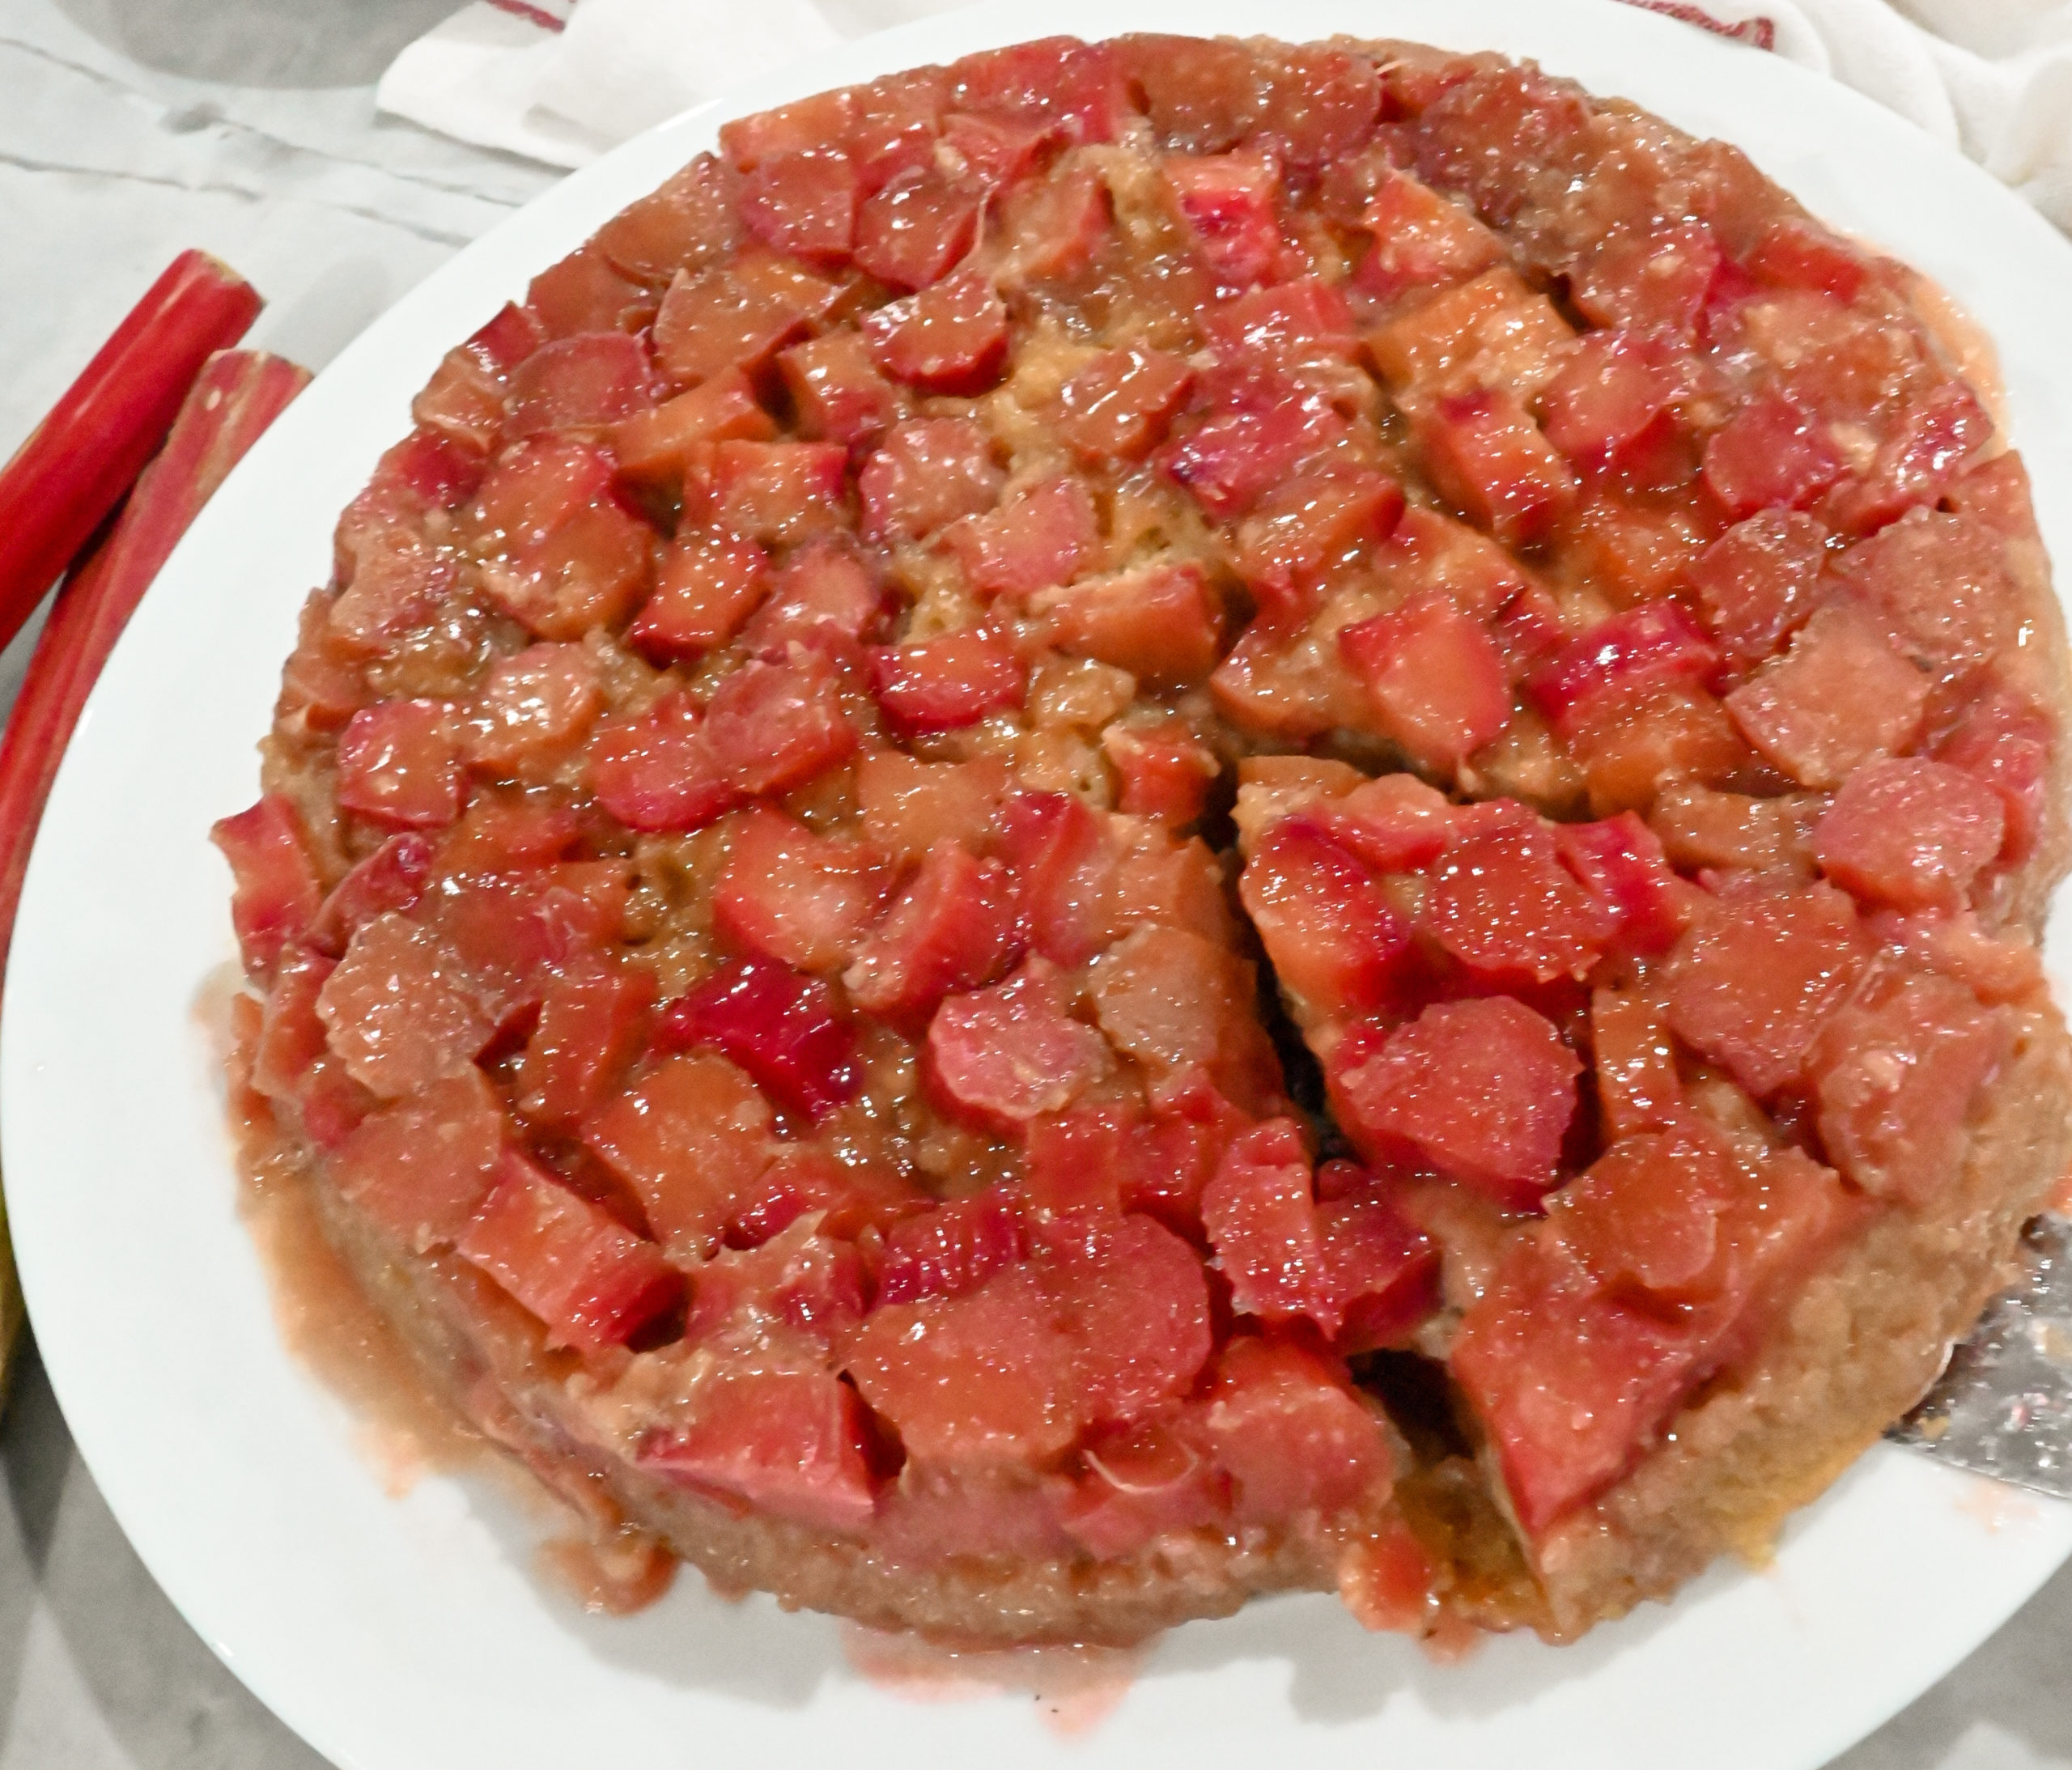 keto rhubarb upside down cake inverted and ready to serve